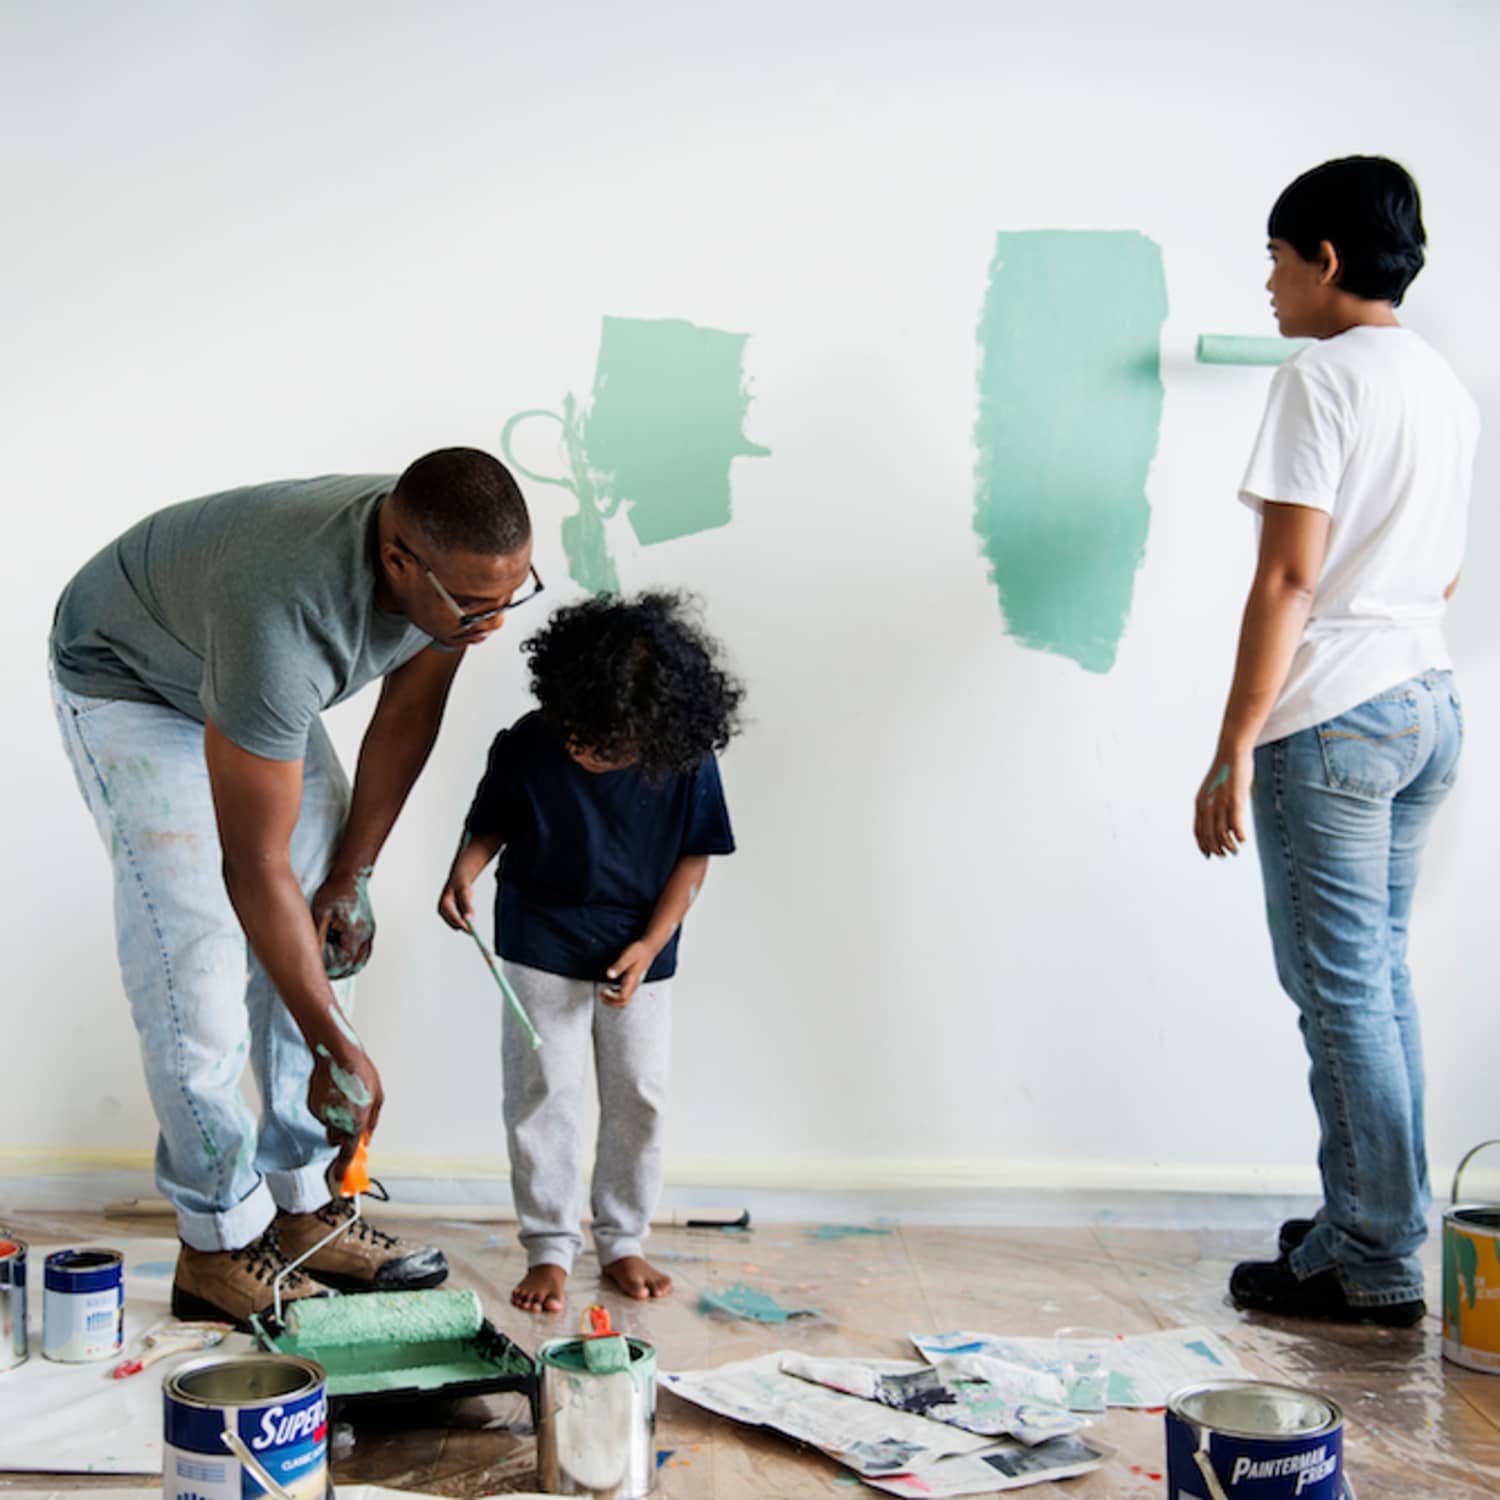 BEHR's Most Popular Paint Colors of 2022